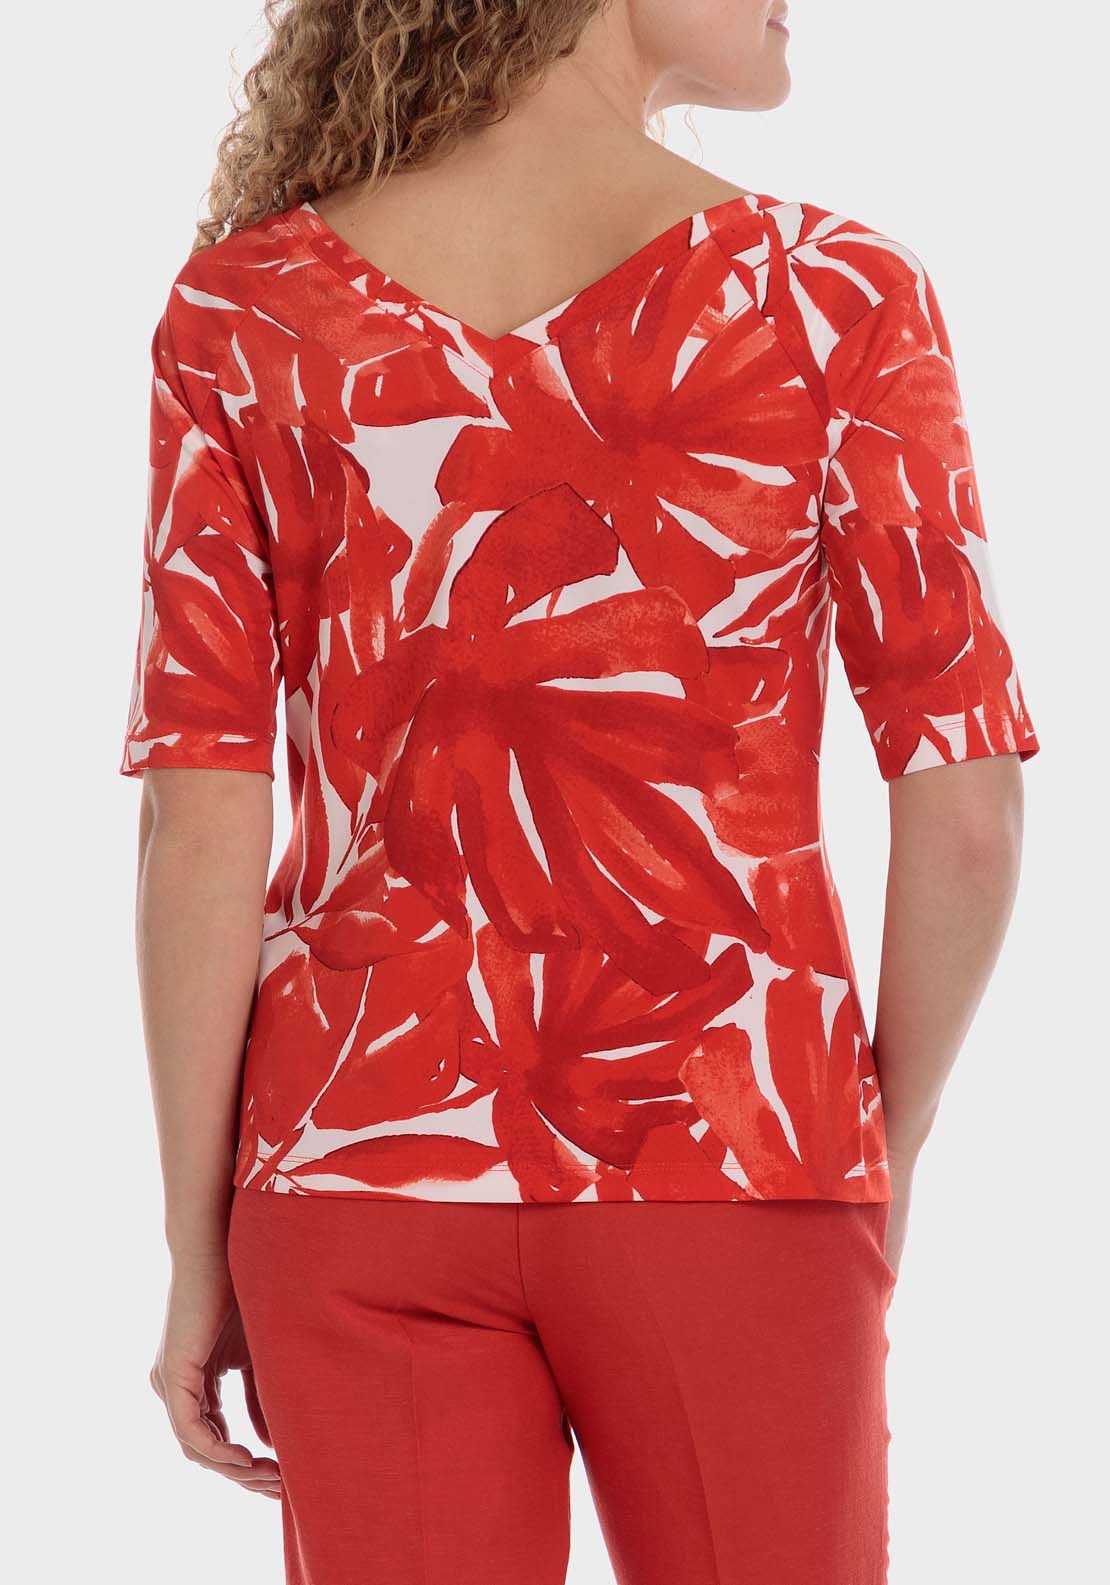 Punt Roma Tropical Print T-Shirt - Red 2 Shaws Department Stores